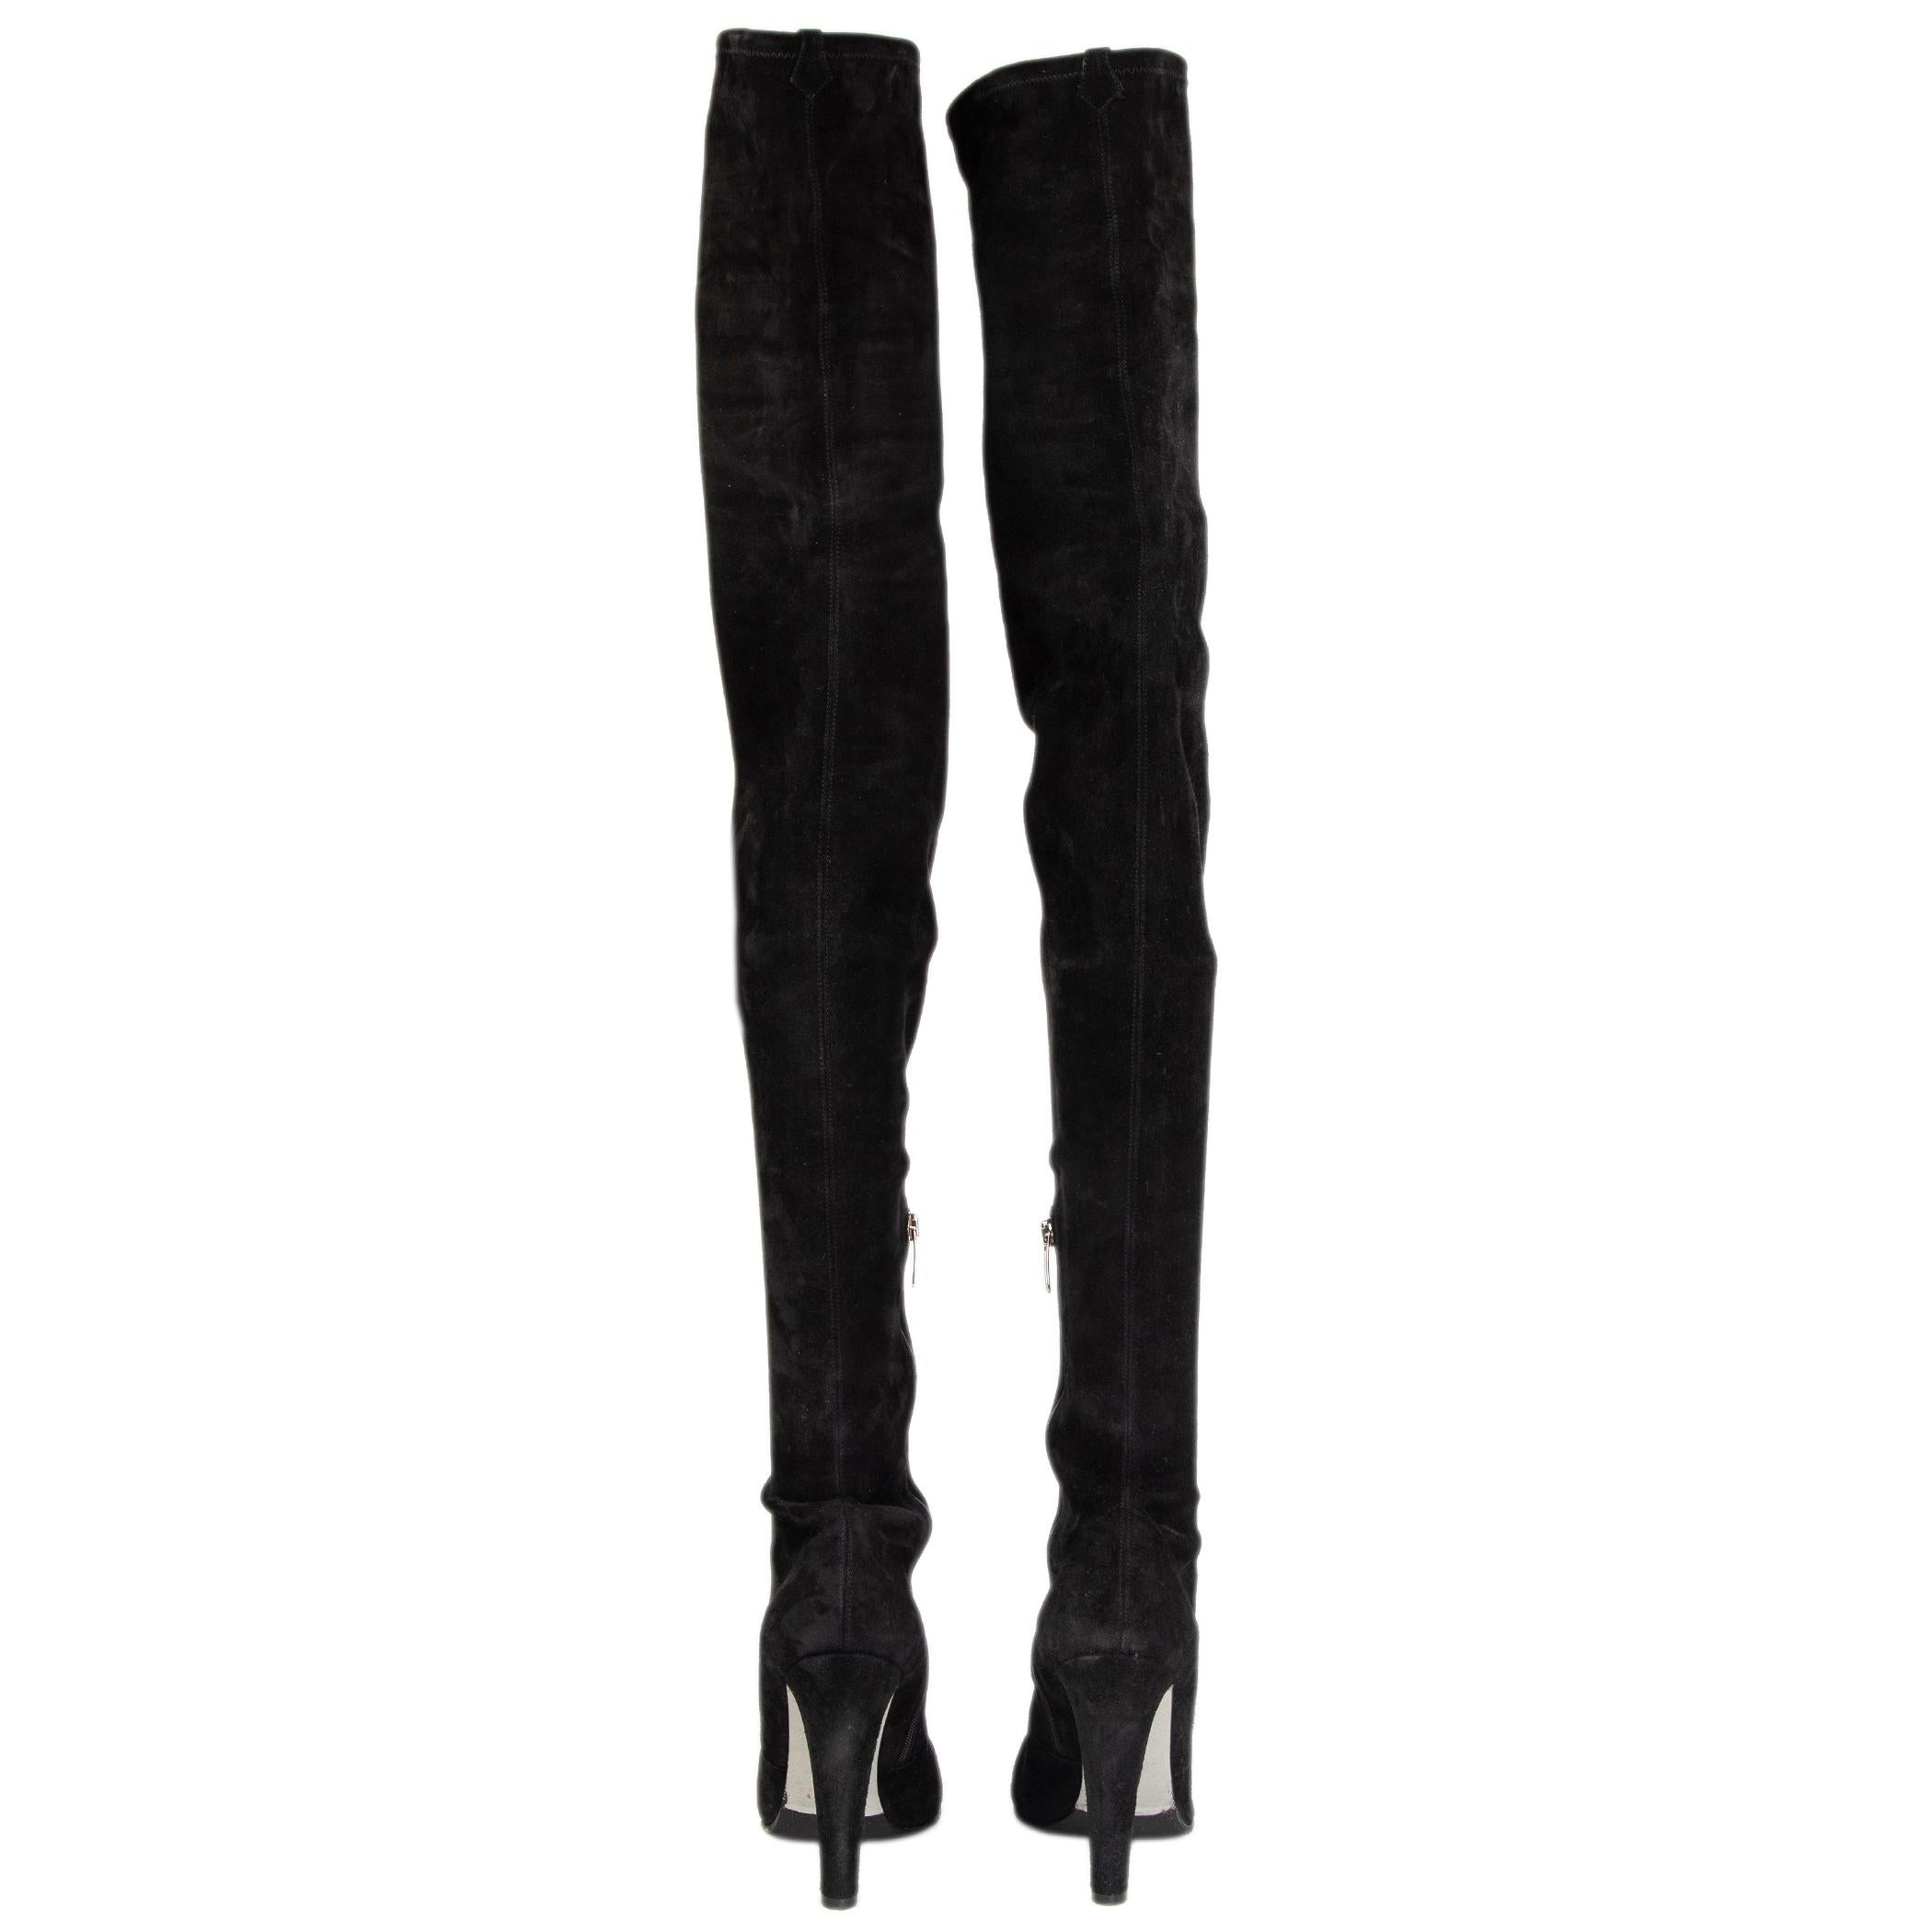 Sergio Rossi Suede Boots in Black Womens Shoes Boots Knee-high boots 